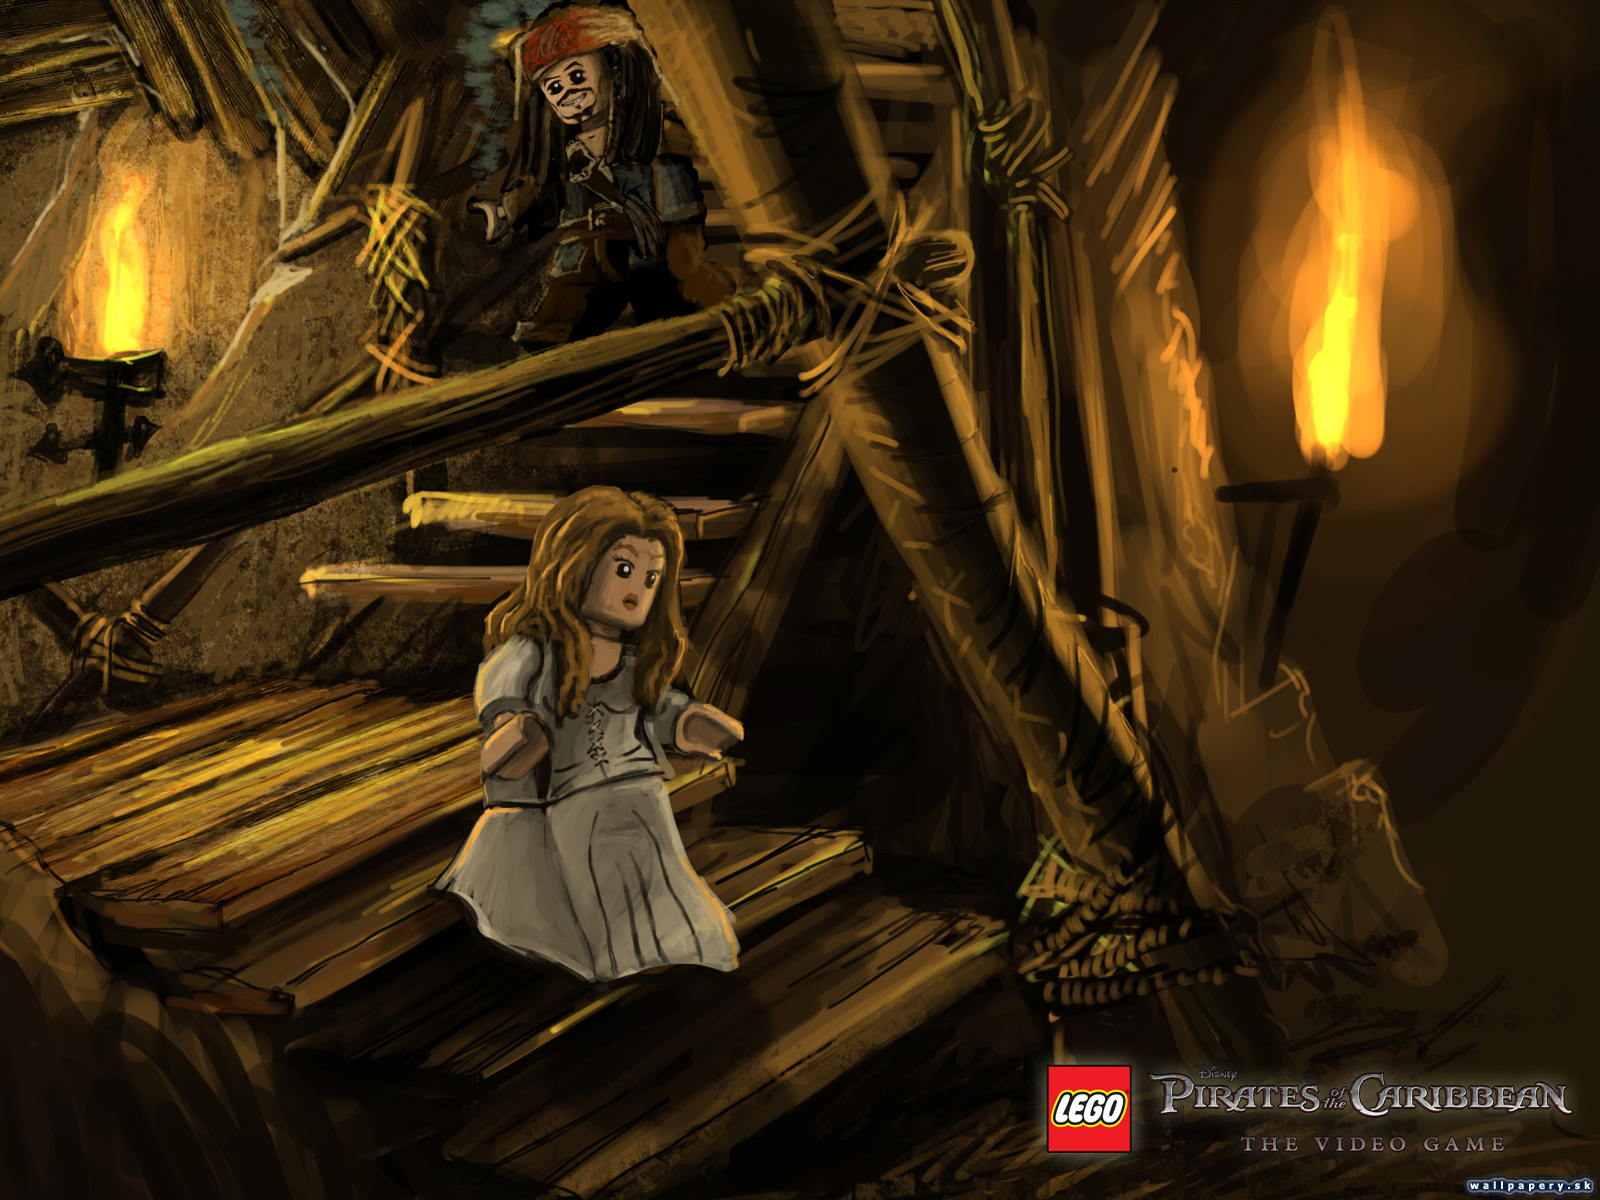 Lego Pirates of the Caribbean: The Video Game - wallpaper 4